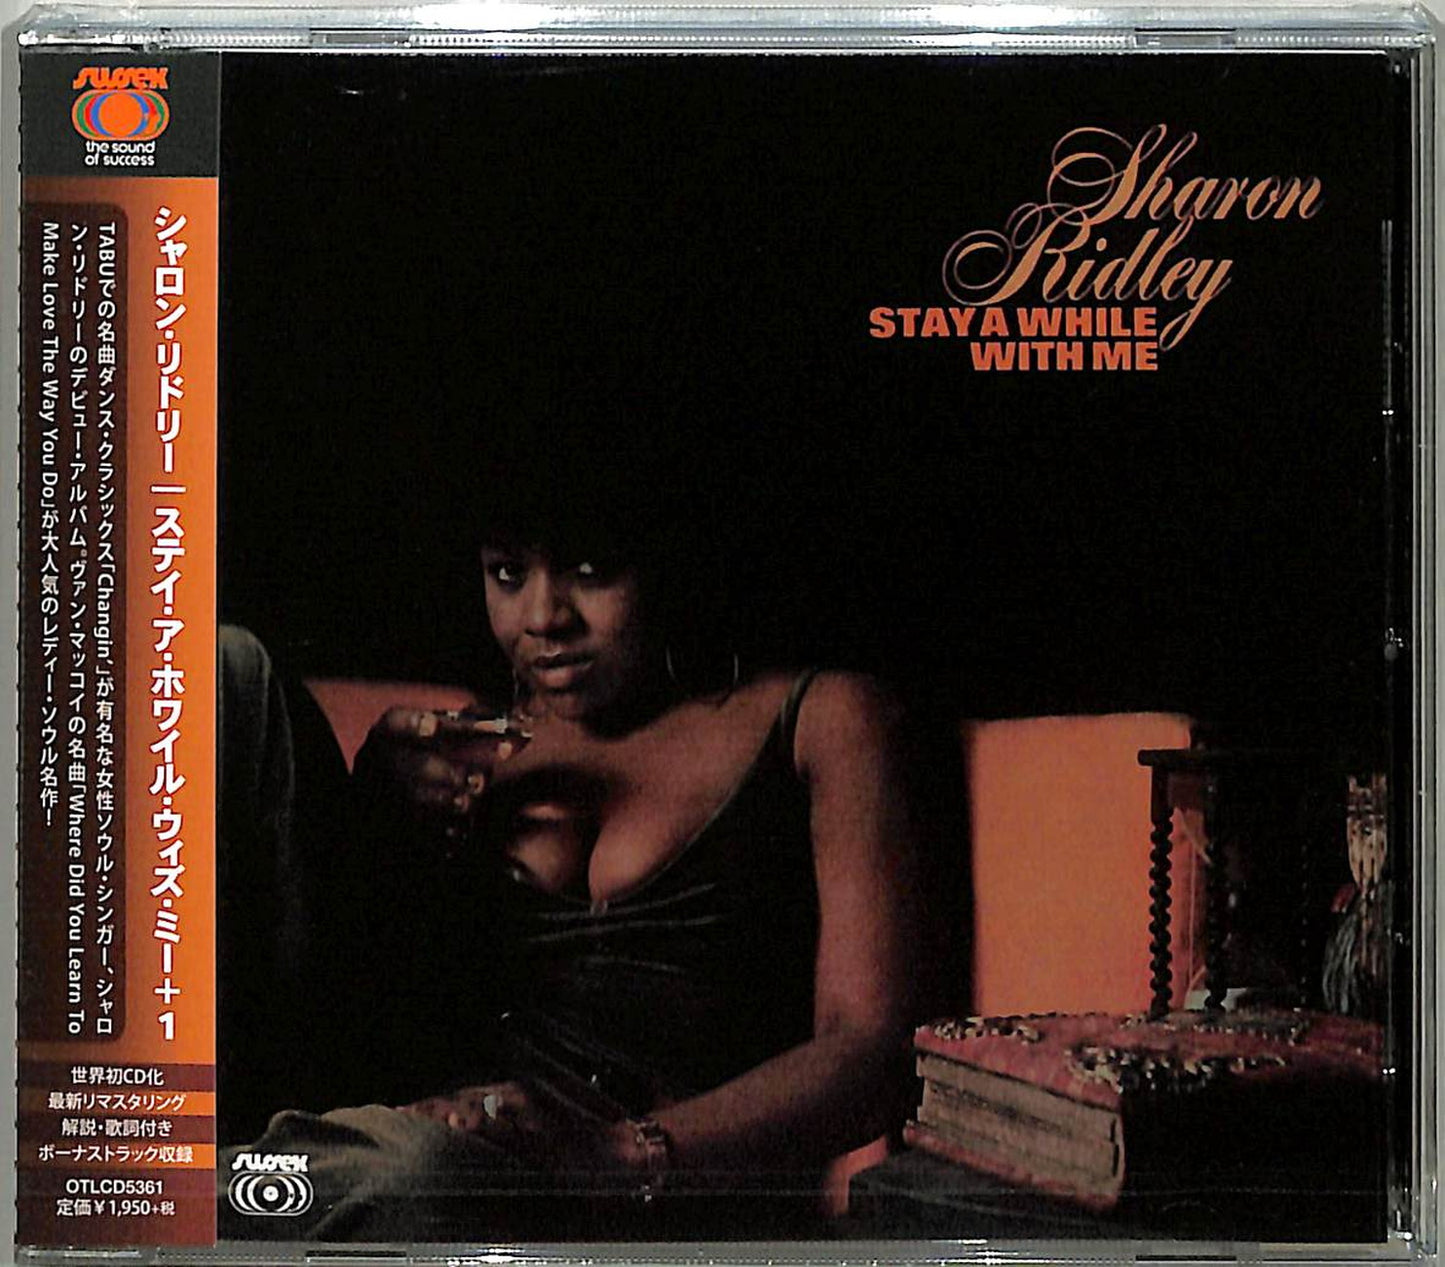 Sharon Ridley - Stay A While With Me +1 - Japan  CD Bonus Track